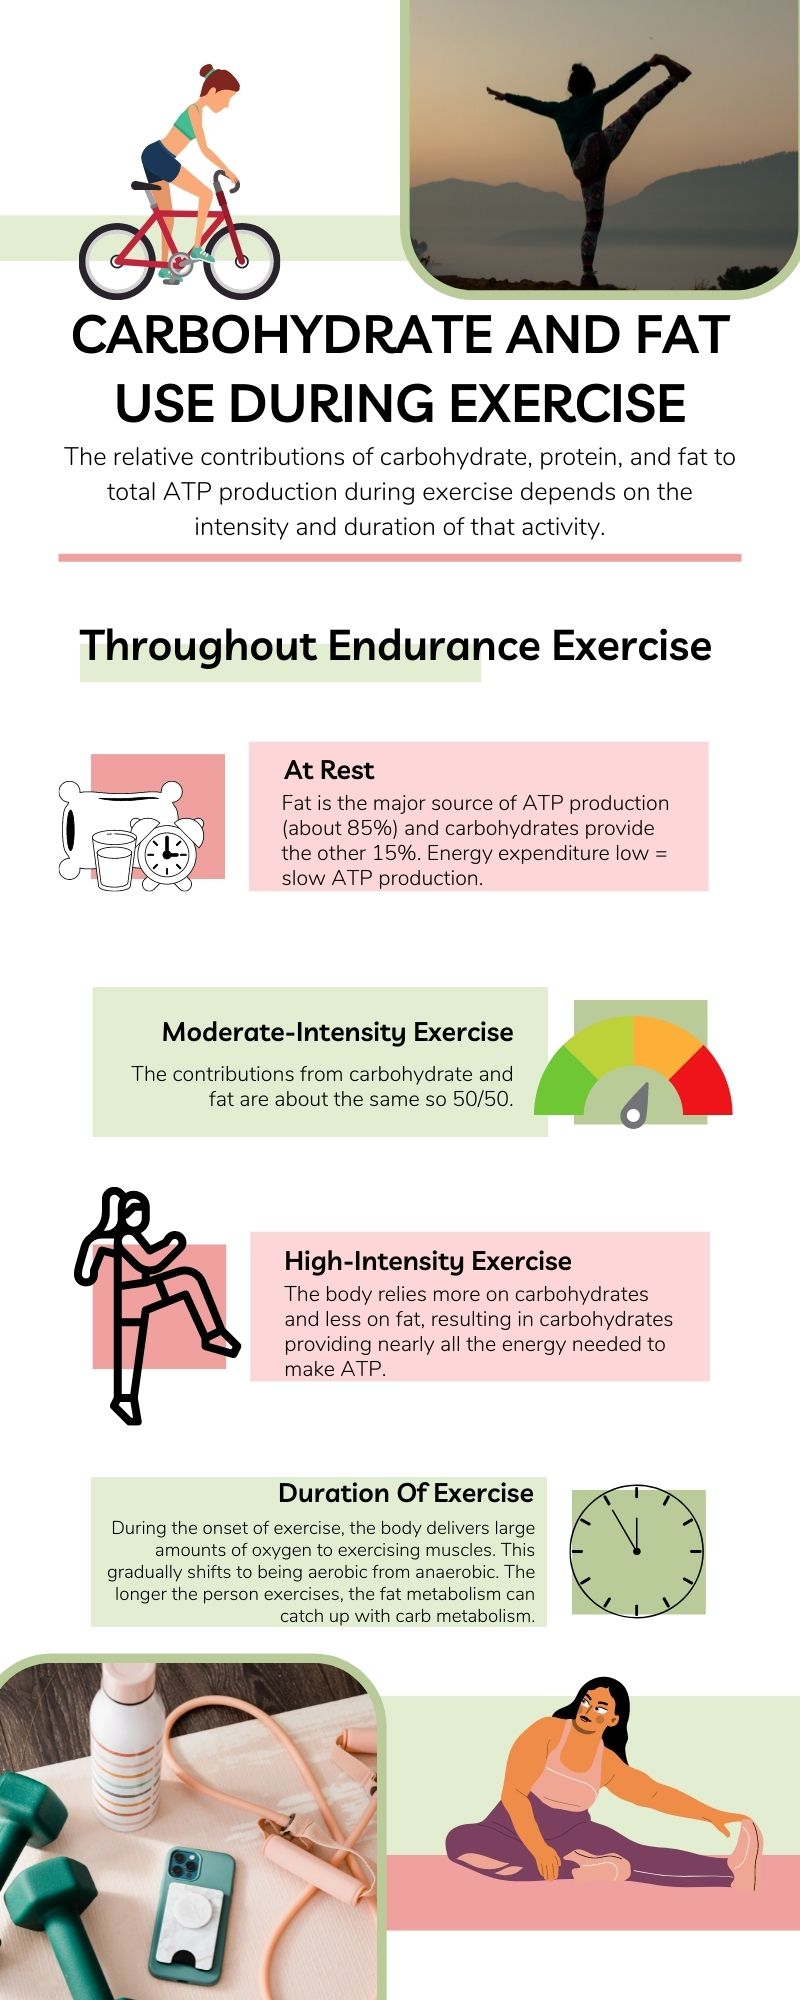 Infograhpic summarizing how fuel use changes during exercise